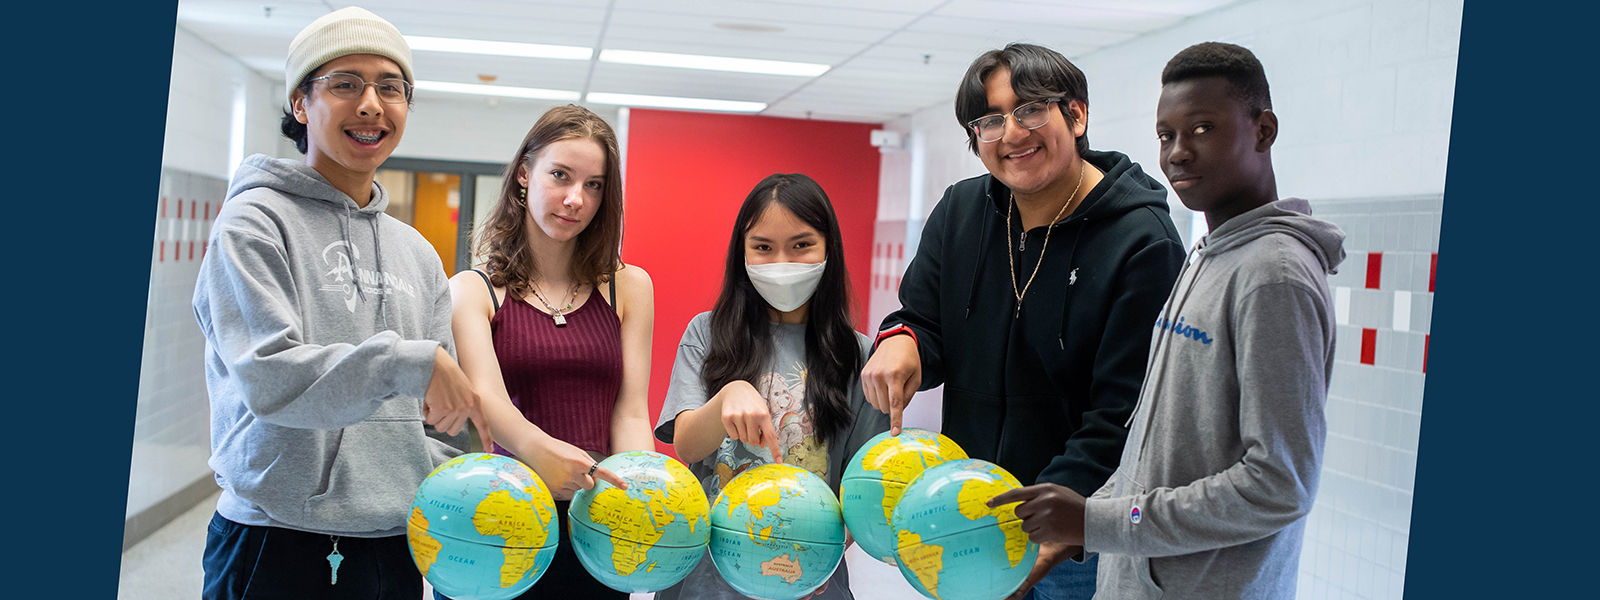 Annandale High School students point out their summer abroad destinations on globes.